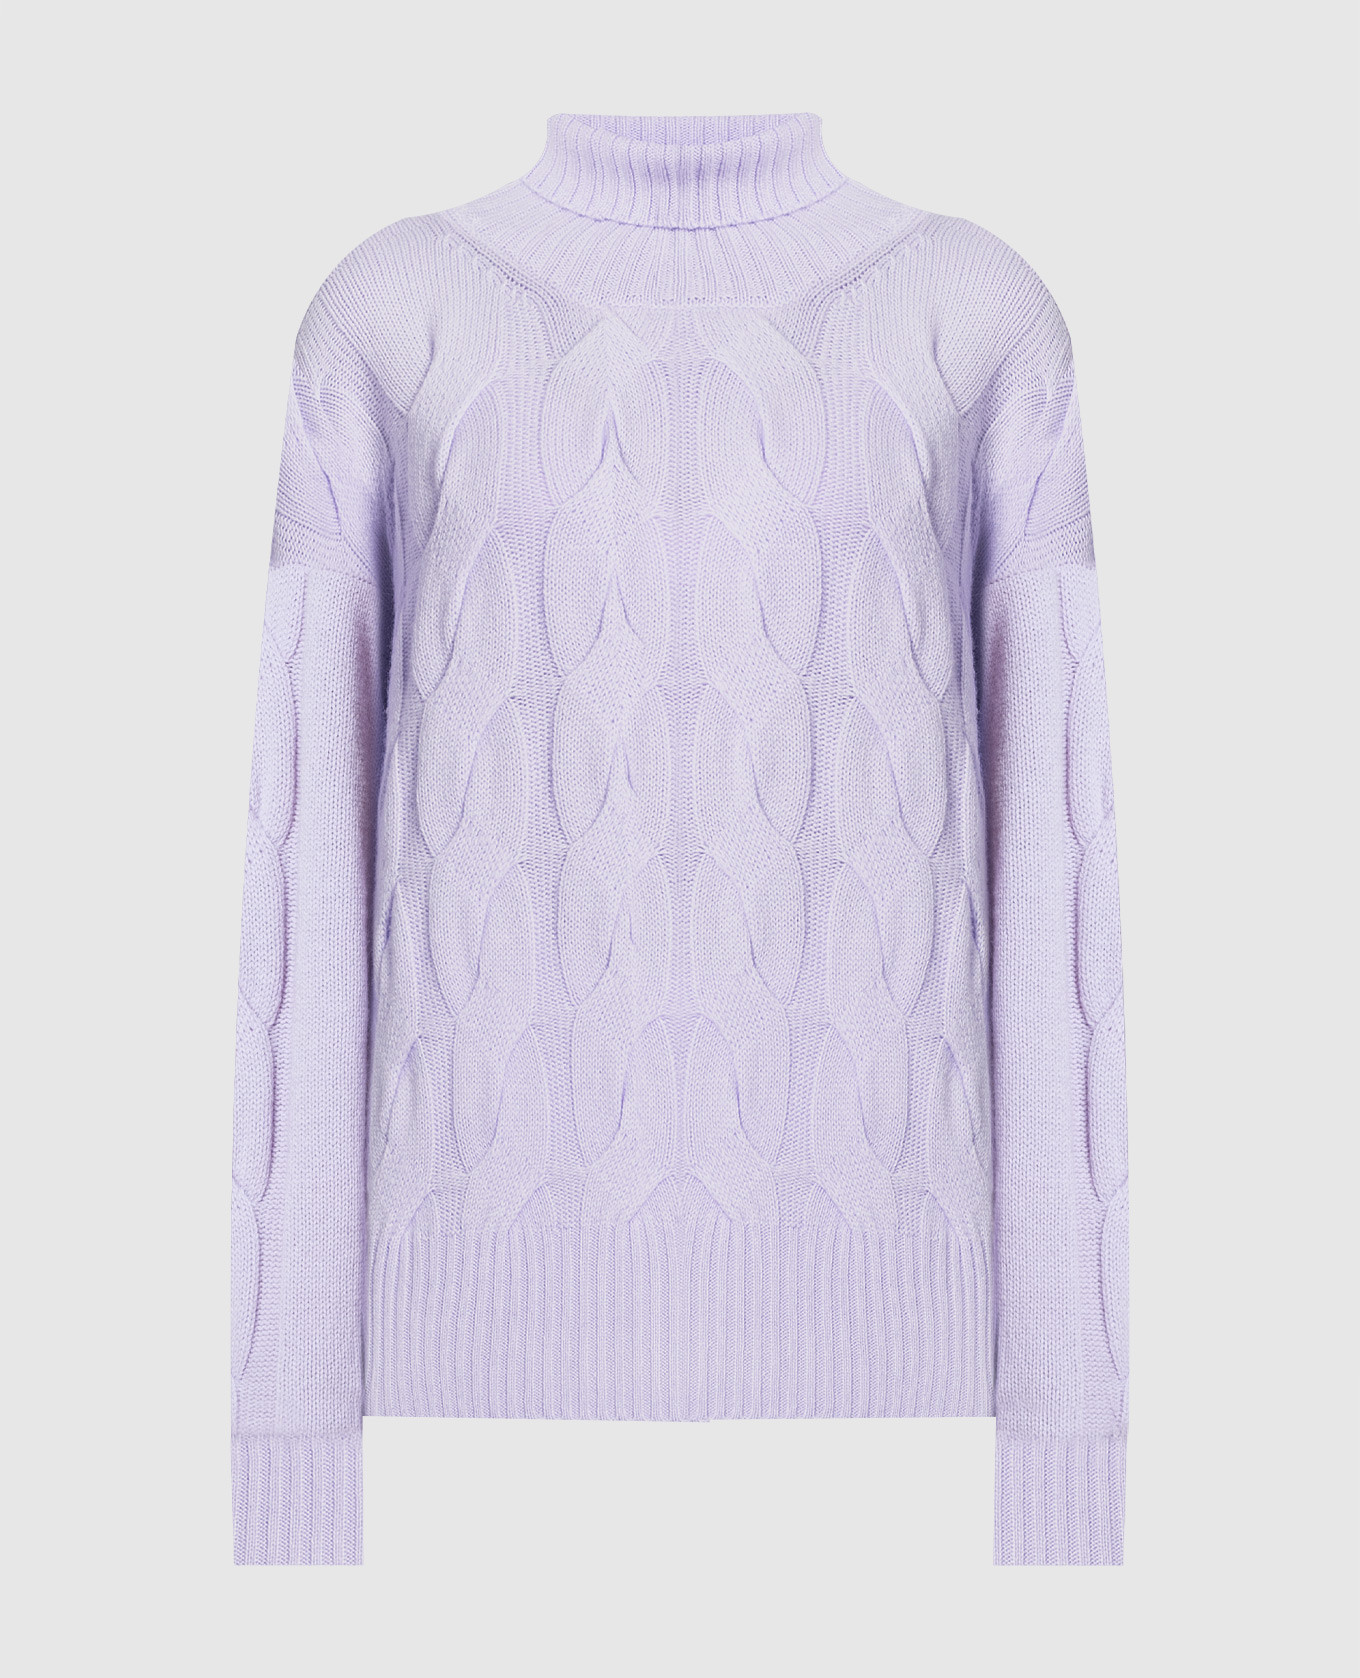 Purple sweater in wool and cashmere with a textured pattern